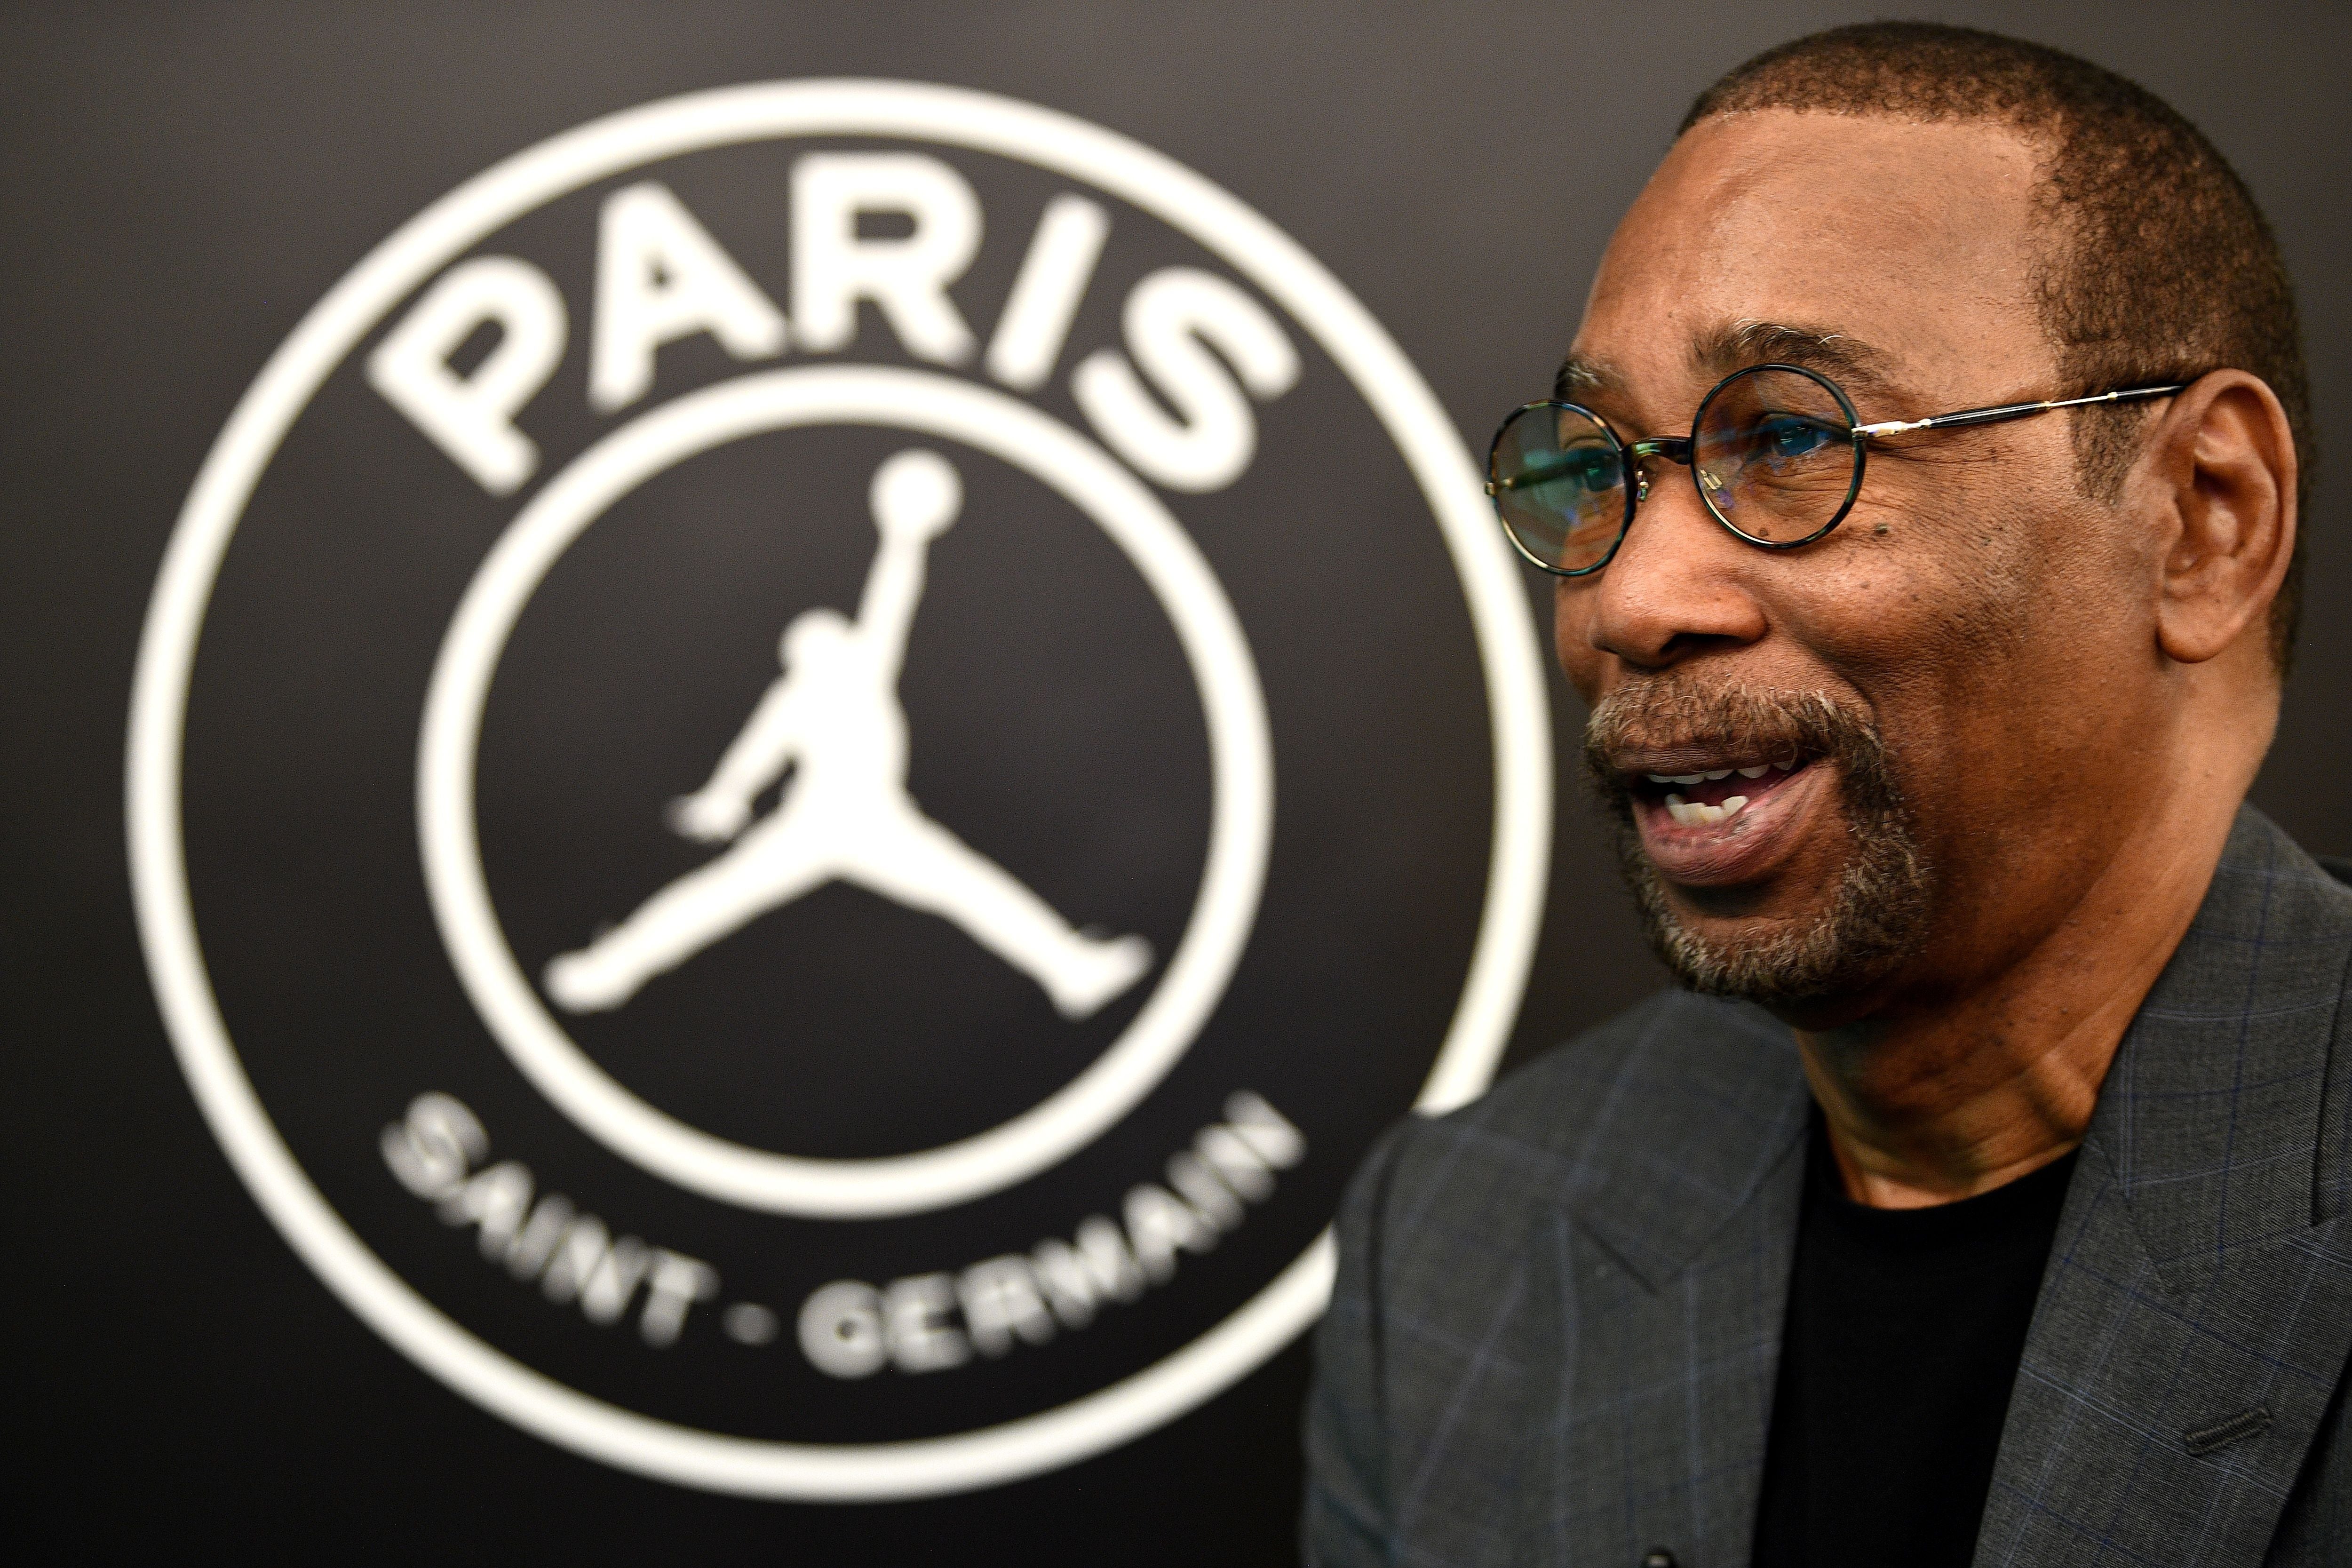 The Jordan Brand's Larry Miller speaks at the Parc des Princes stadium in Paris on September 13, 2018 during the presentation of Paris Saint-Germain's UEFA Champions League new jerseys made in partnership with the Jordan Brand, created by the Chicago Bulls' basketball legend. (